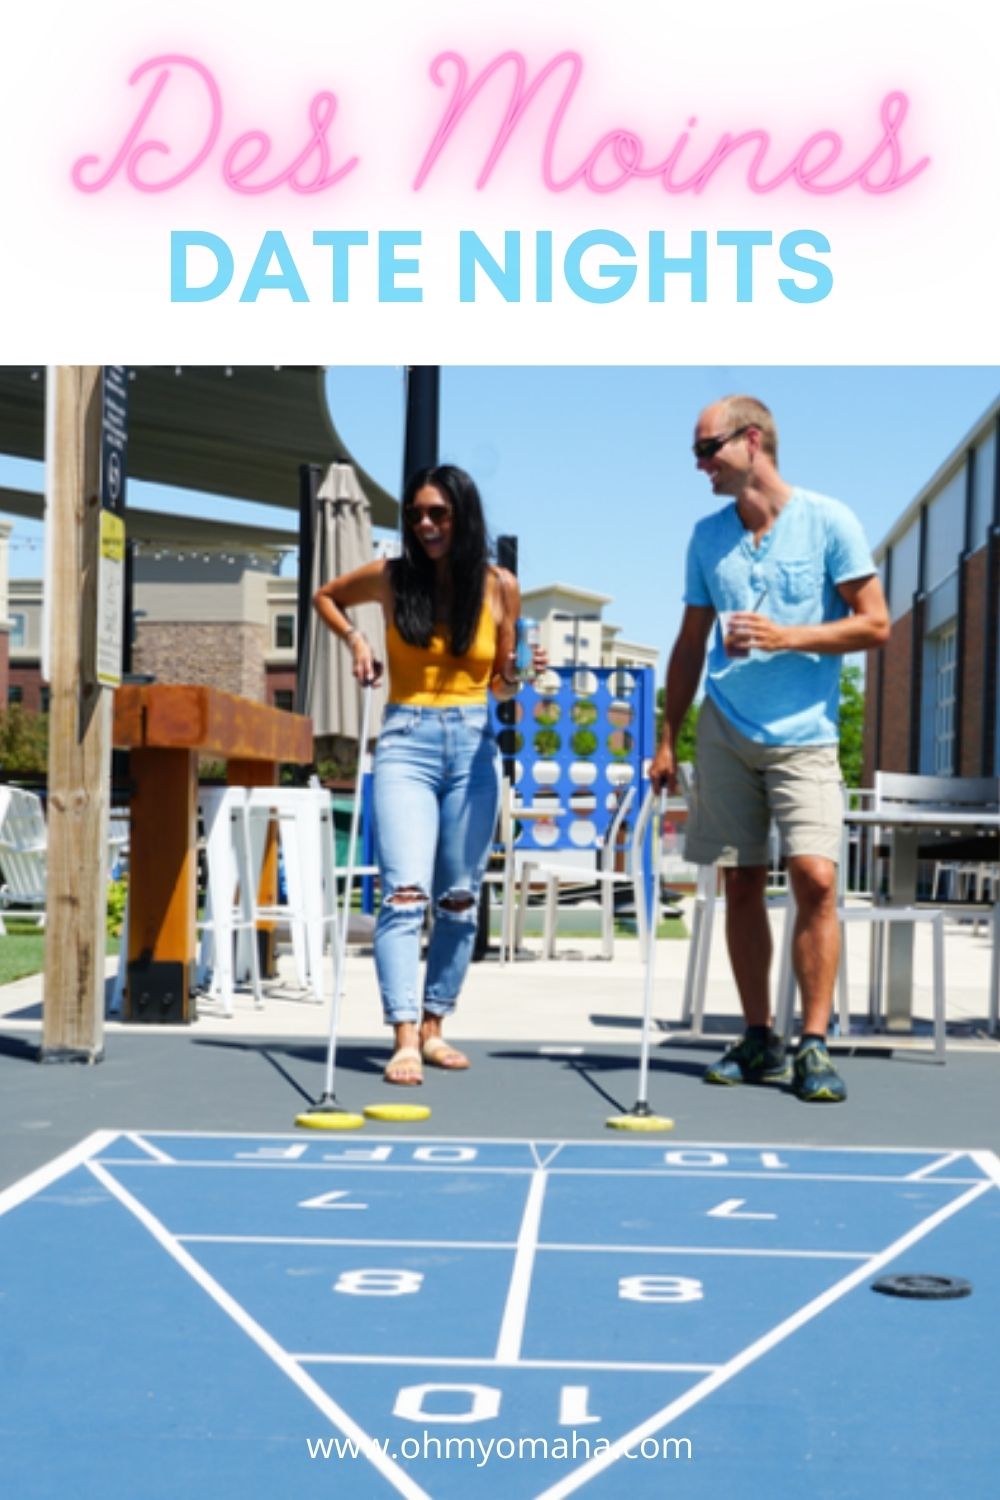 Looking for a unique date in Des Moines or something totally fun like a date at Smash Park? Here are some recommended stops for future date nights or romantic getaways to DSM.